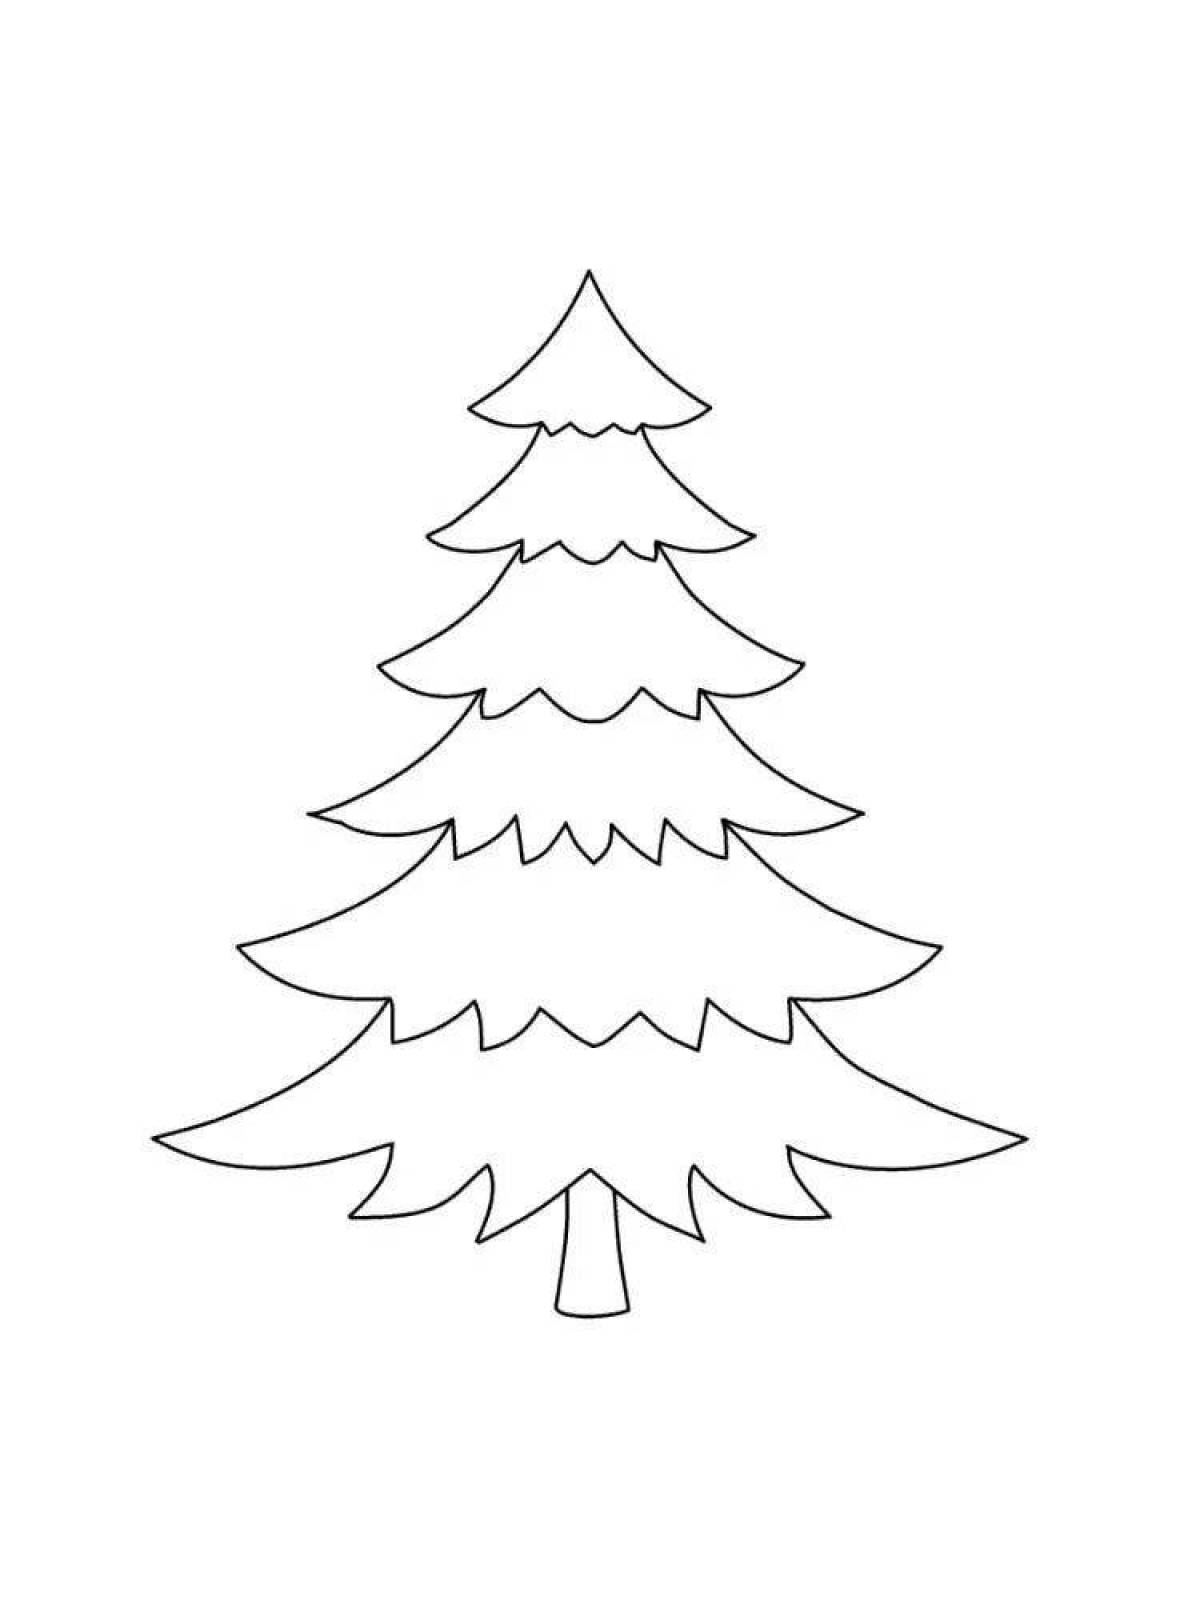 Amazing Christmas tree coloring book for kids